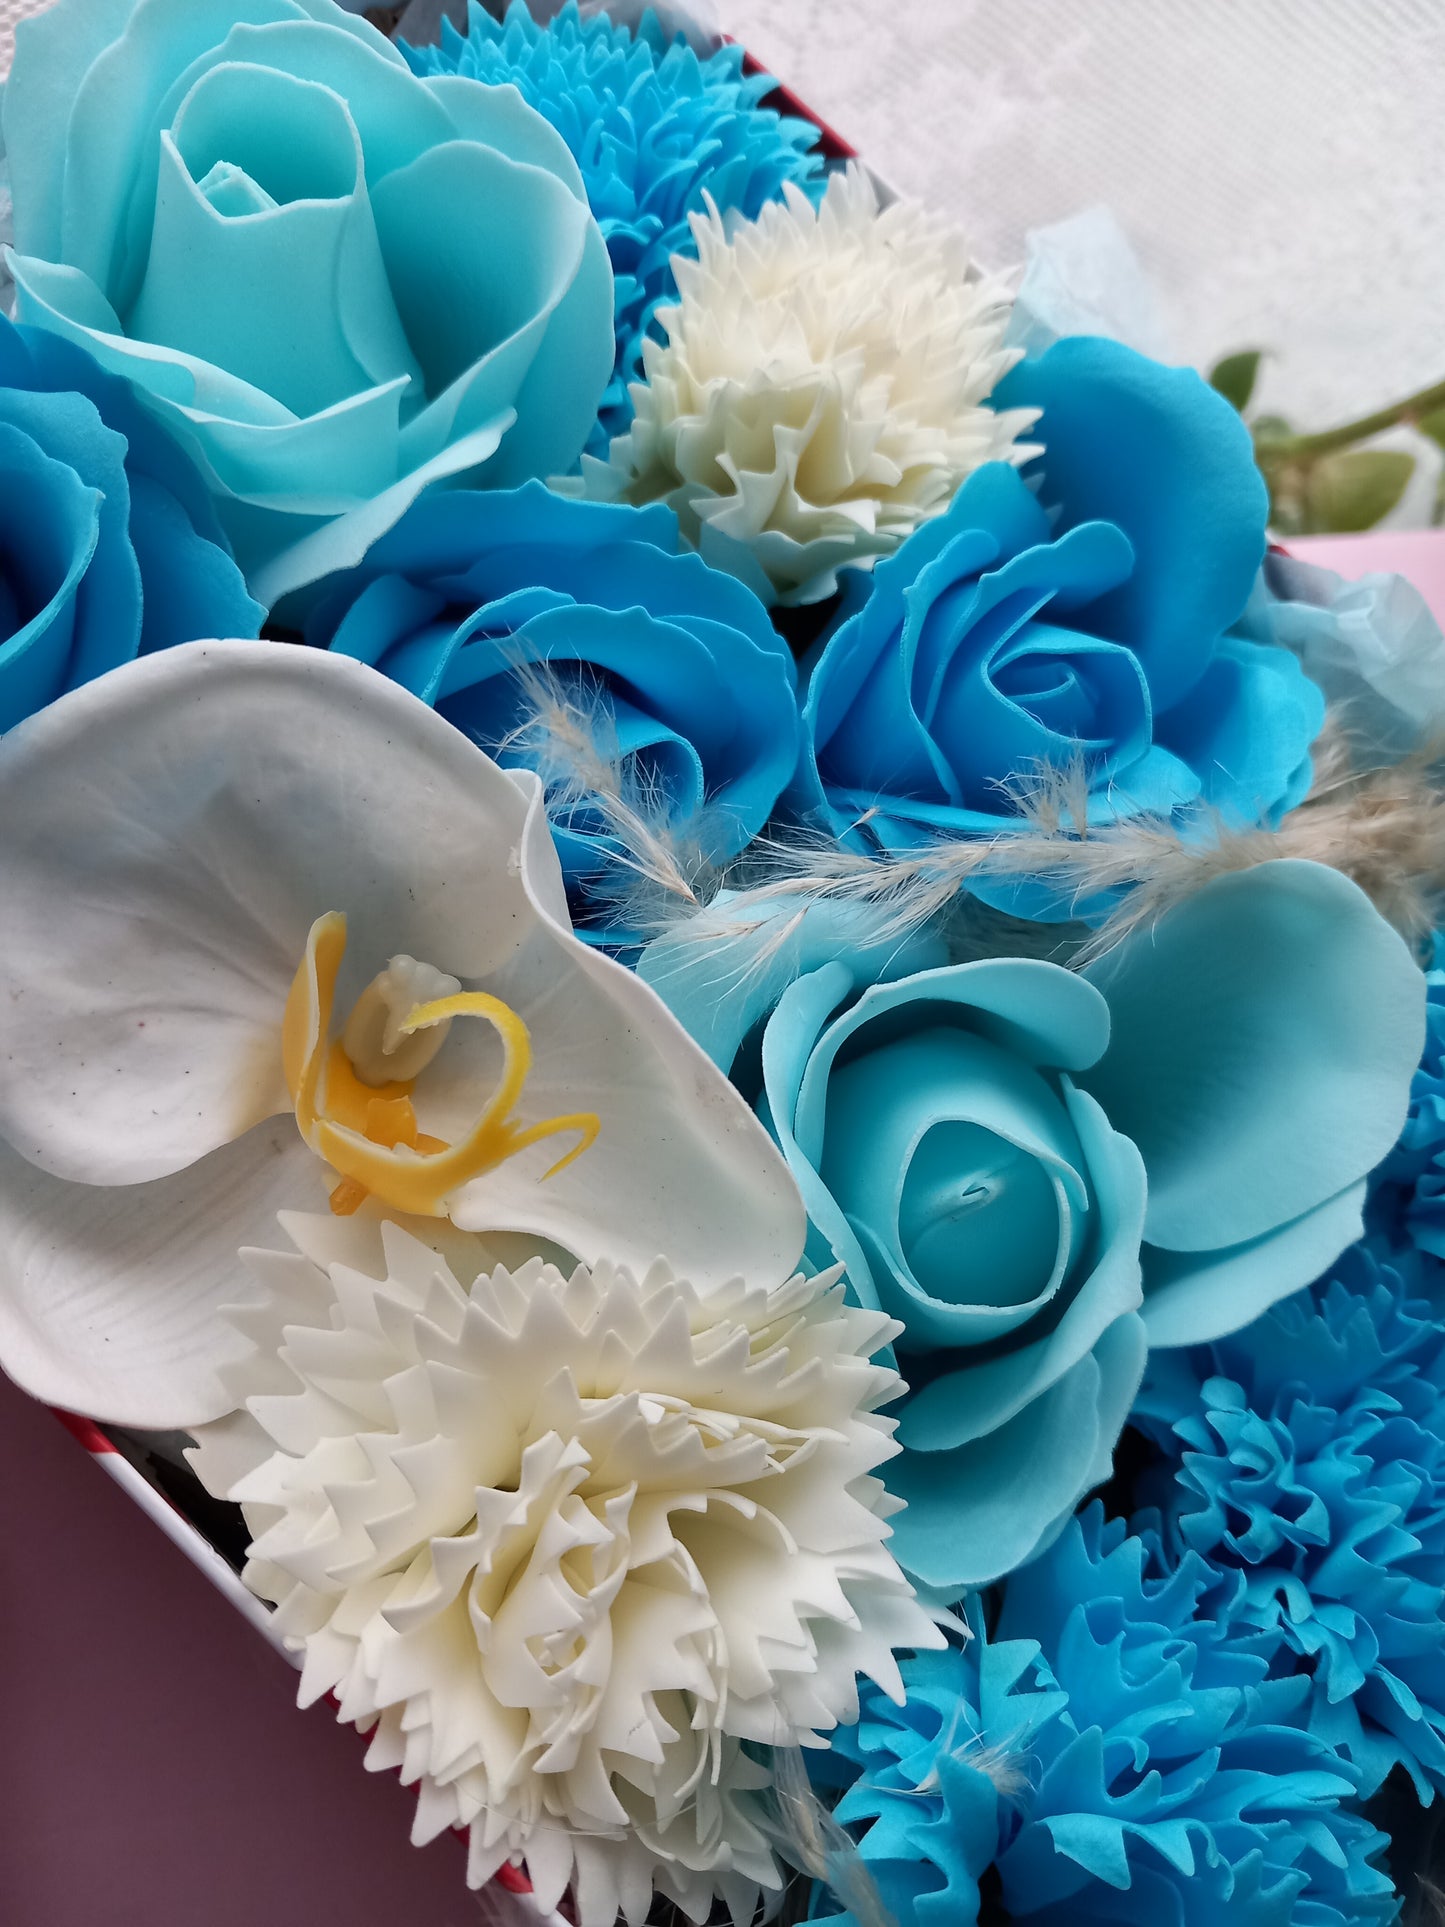 BLUE FLOWER SOAP IN CANDY CANE DISPLAY BOX